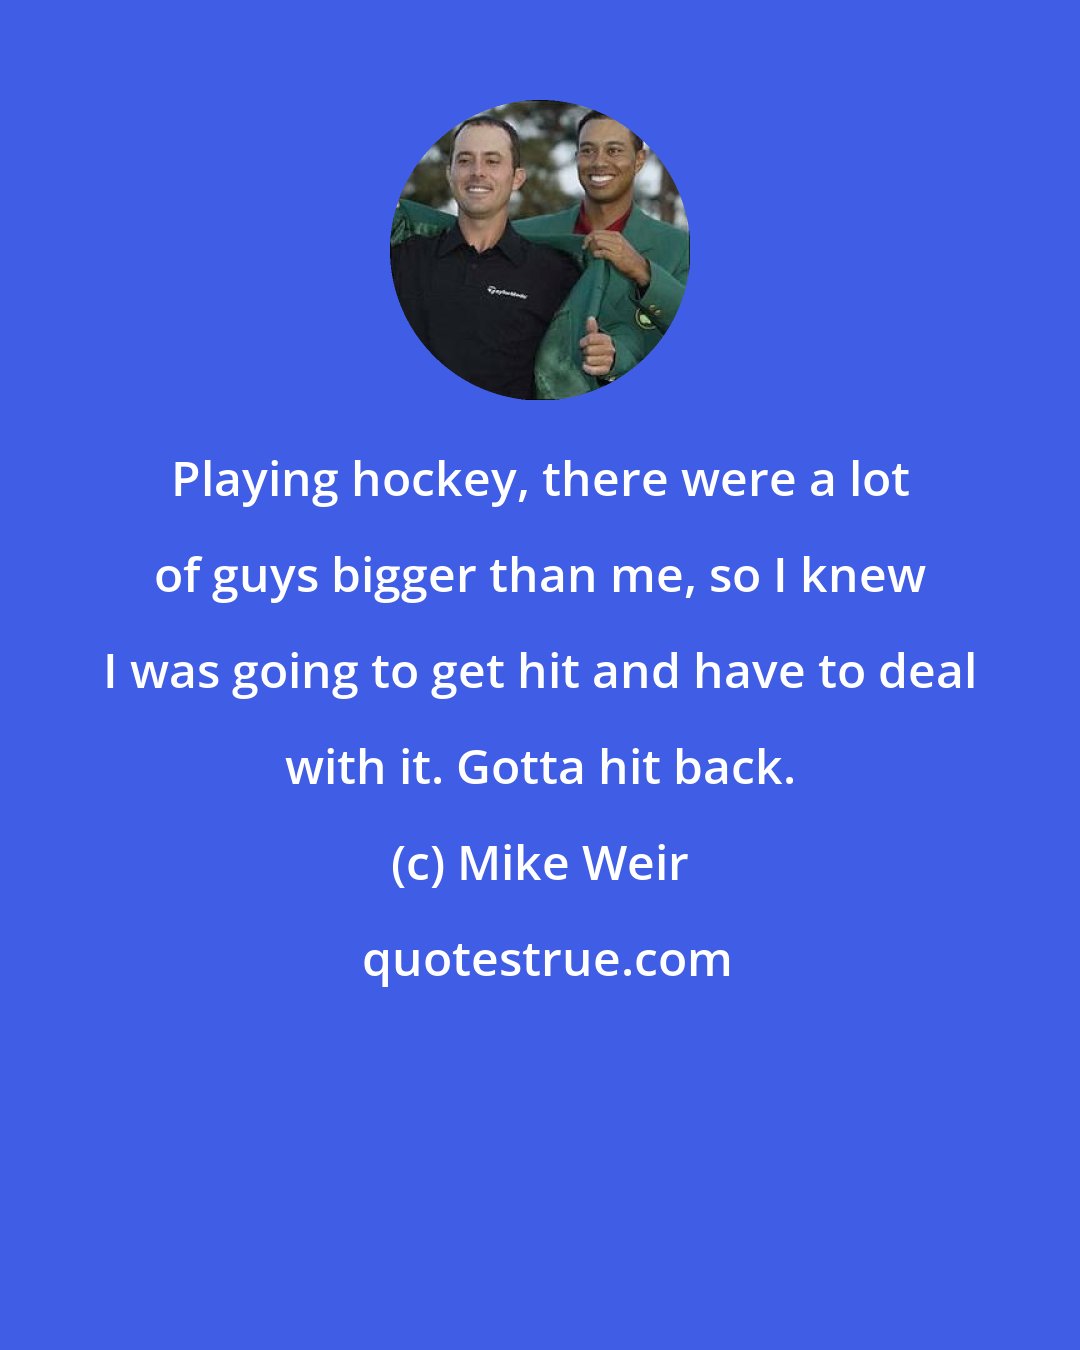 Mike Weir: Playing hockey, there were a lot of guys bigger than me, so I knew I was going to get hit and have to deal with it. Gotta hit back.